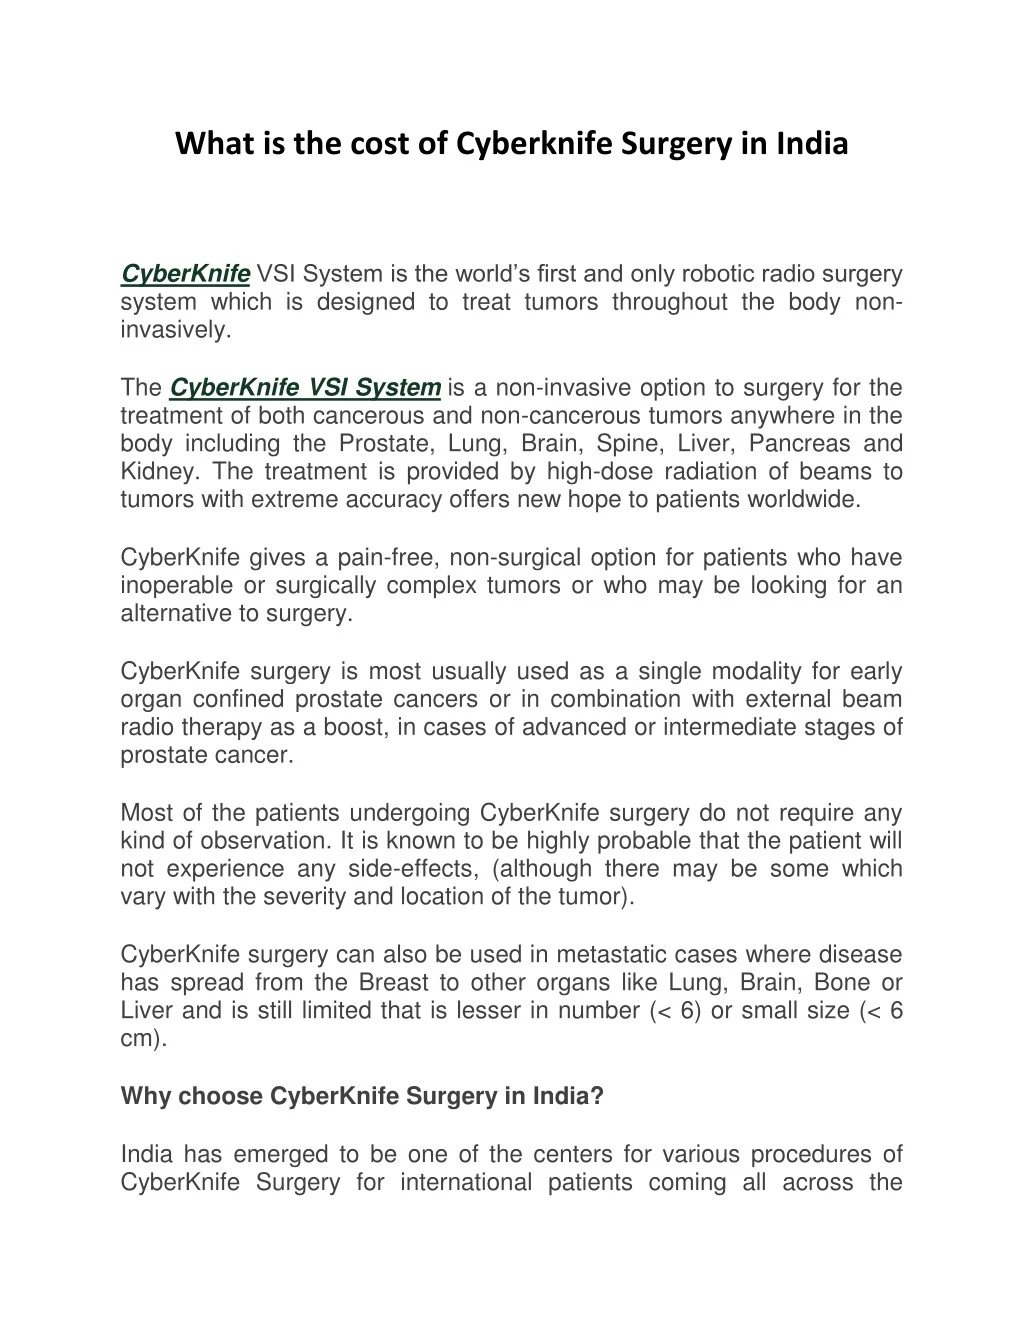 what is the cost of cyberknife surgery in india